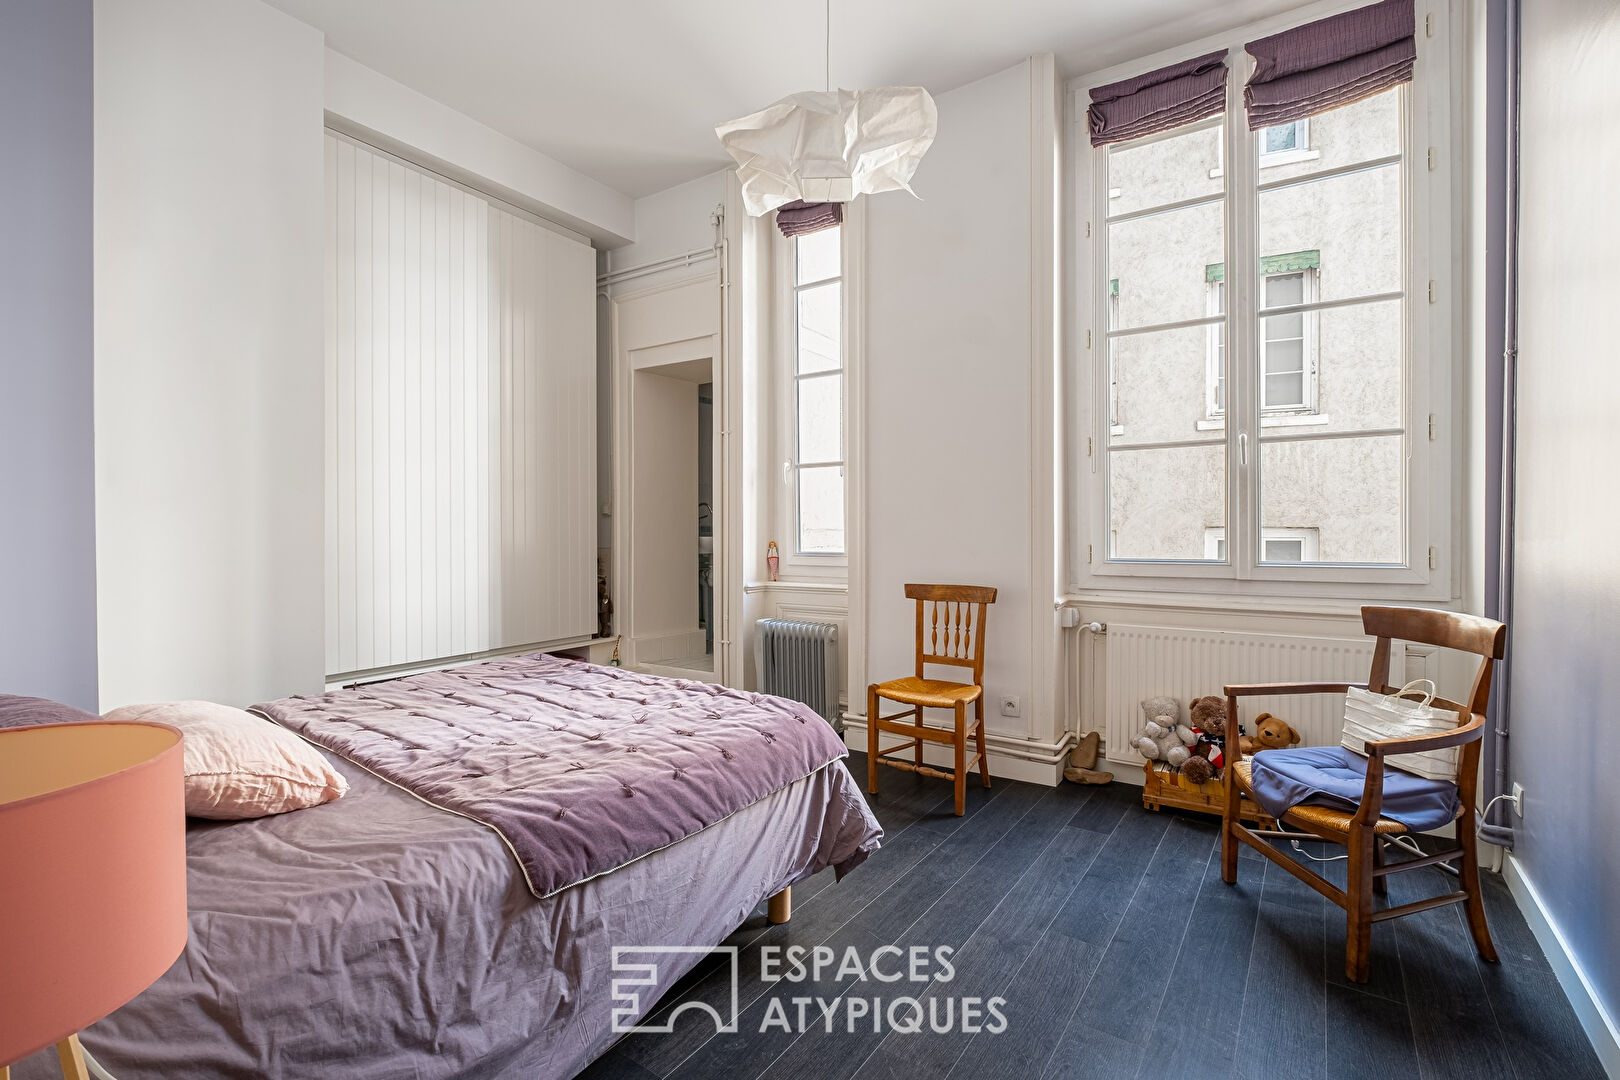 Appartement bourgeois au coeur d’Ainay